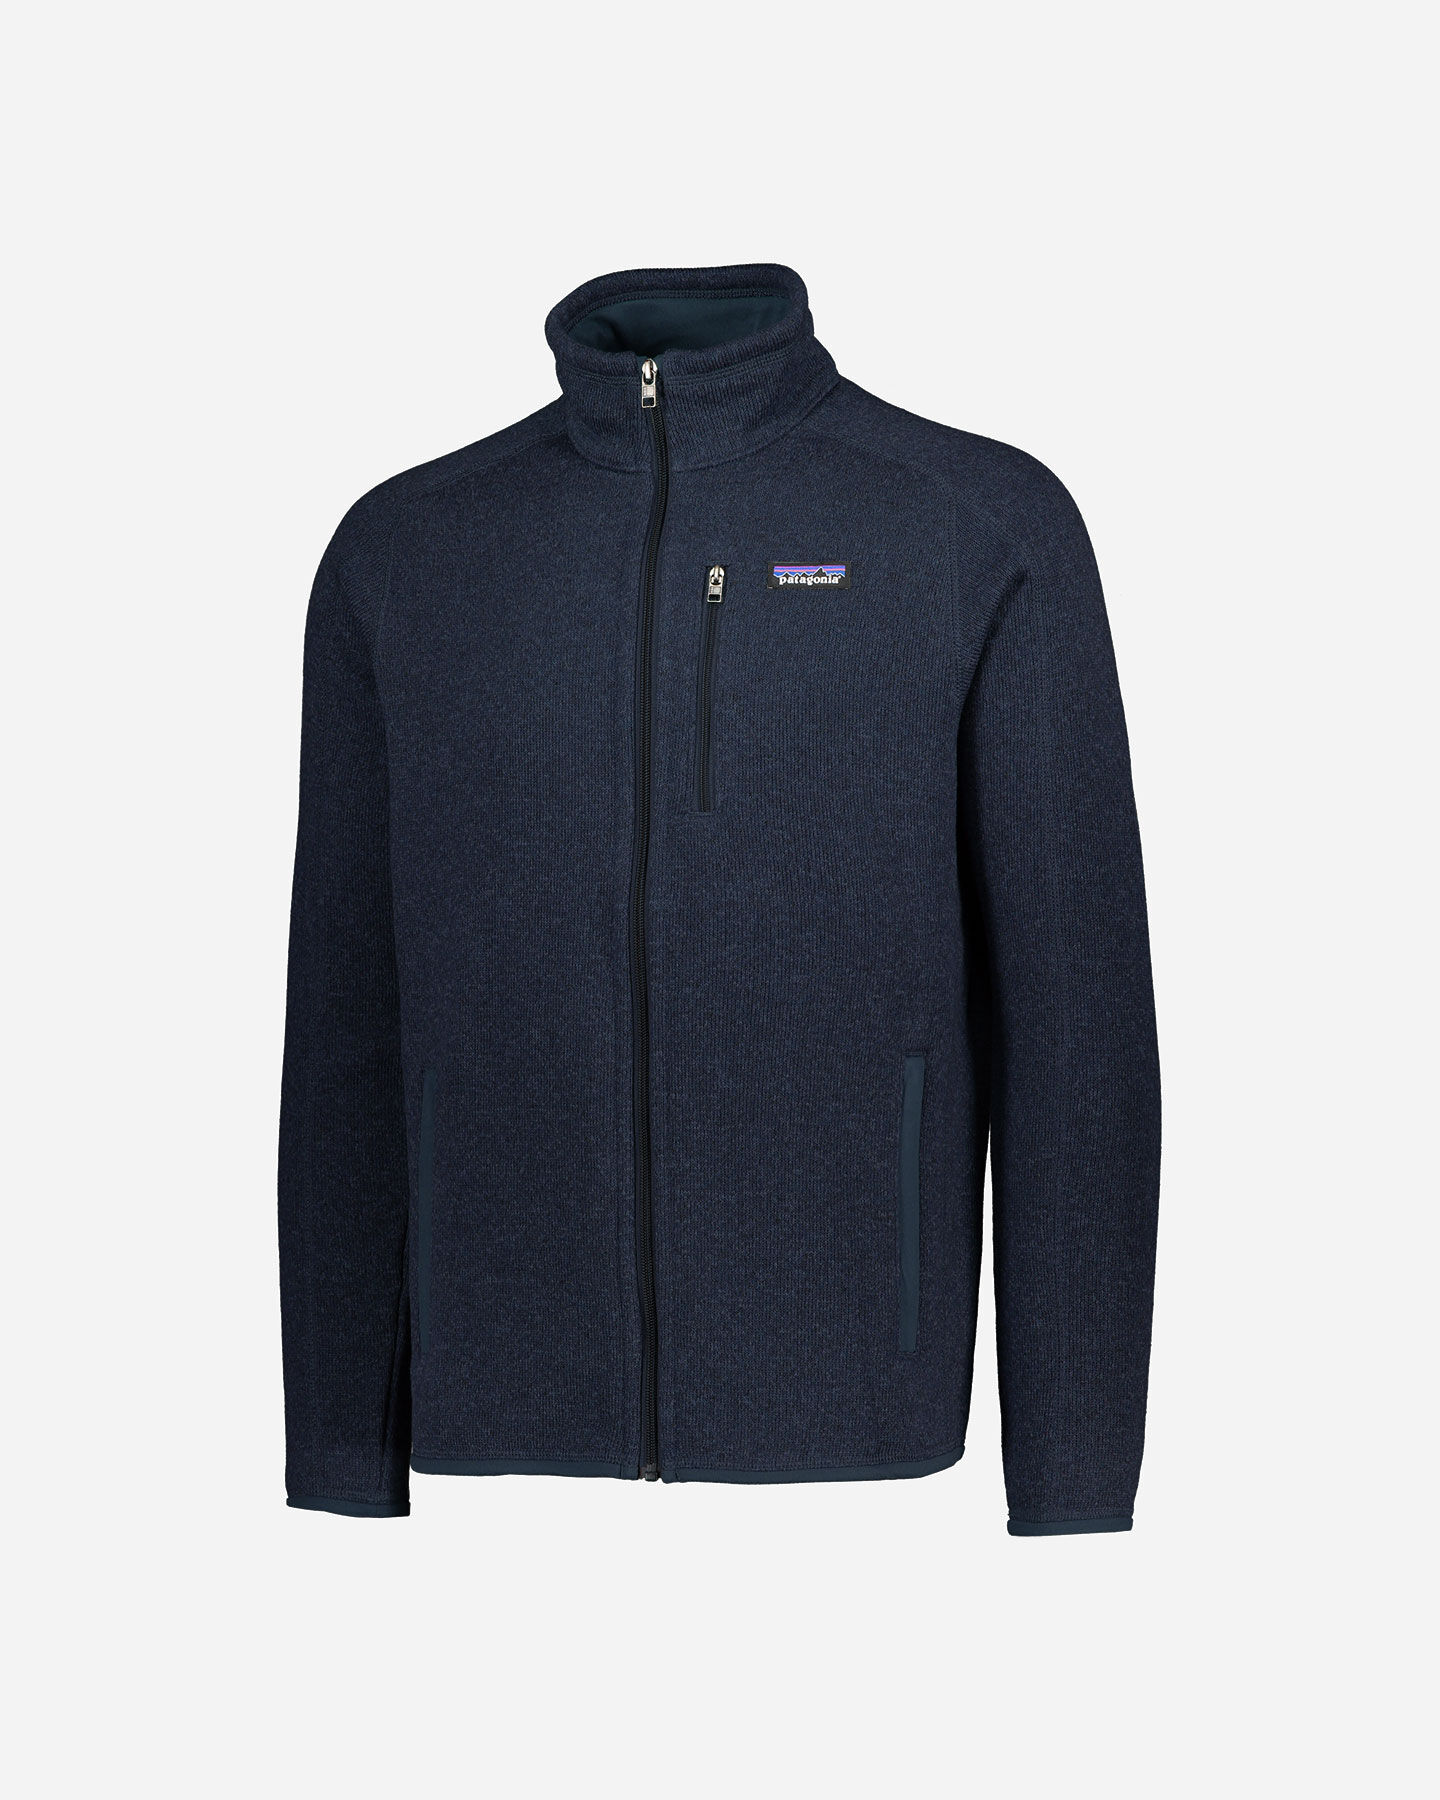  Pile PATAGONIA BETTER SWEATER M S4071094|1|L scatto 5